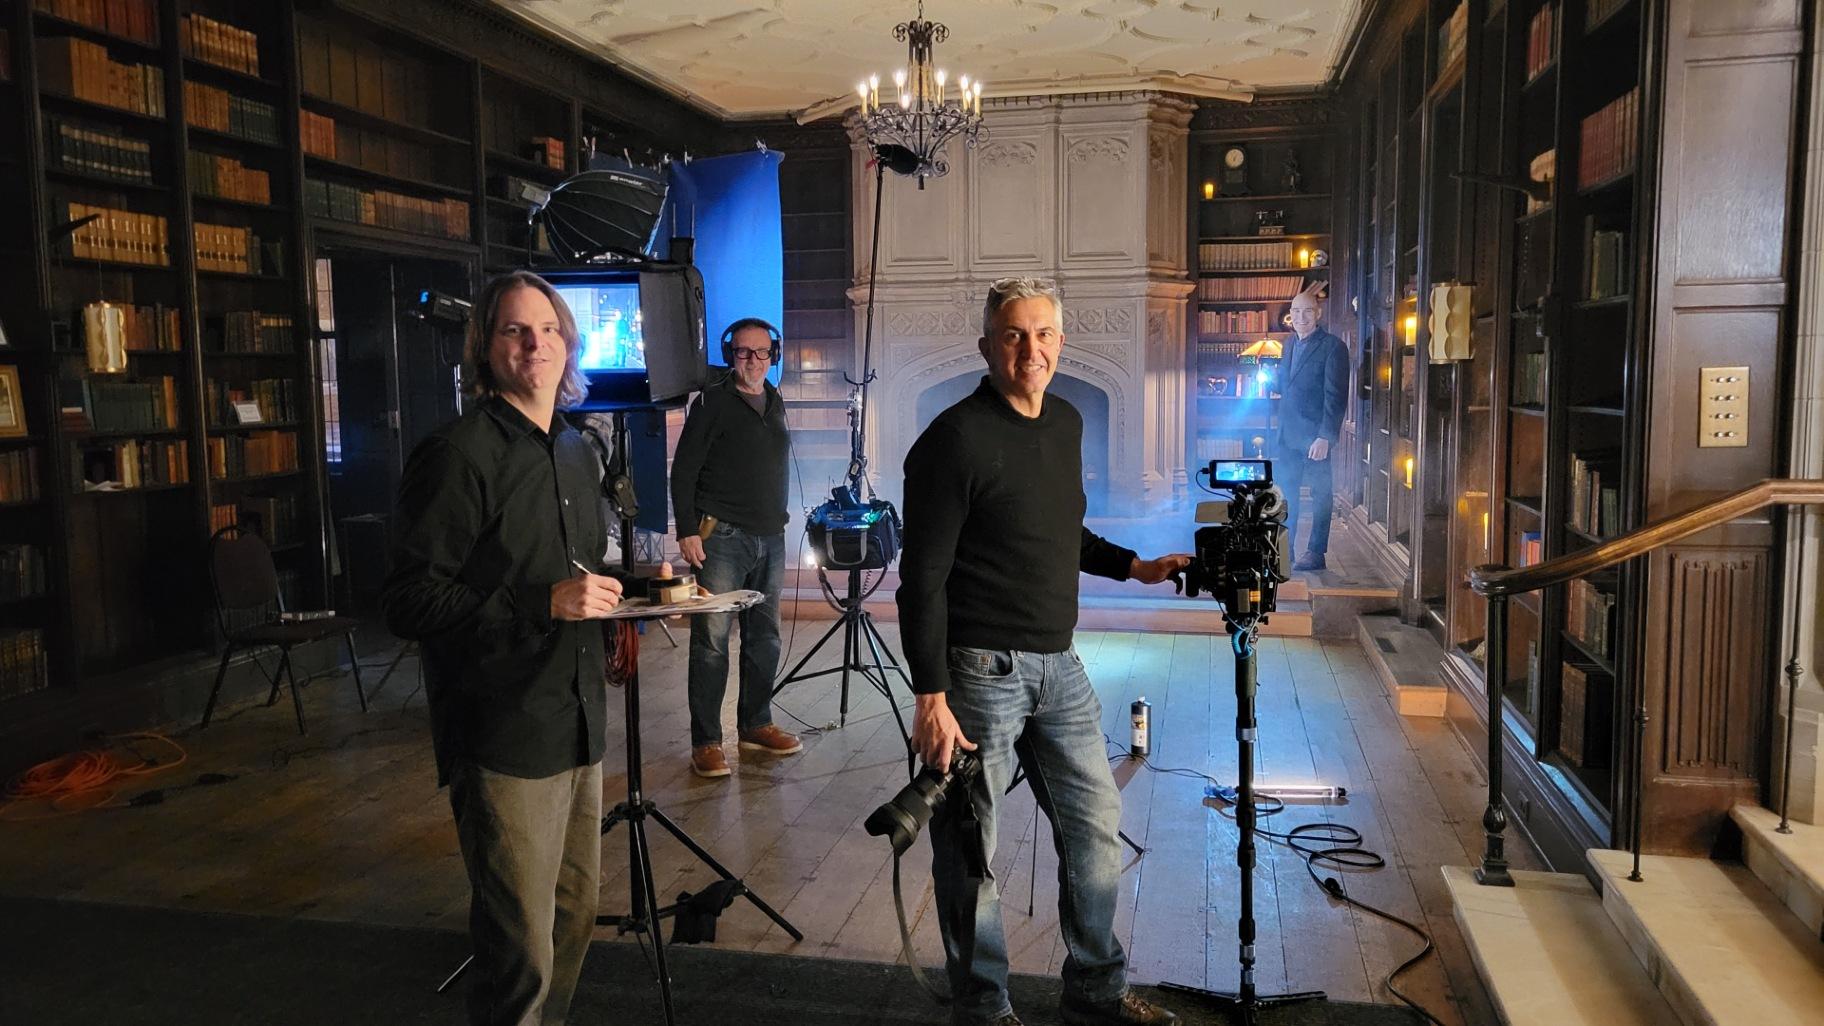 “Chicago Mysteries” producer and co-writer Sean Keenehan, field audio engineer Martin Stebbing, director of photography Oral User and host and co-writer Geoffrey Baer on set at the Mayslake Peabody Estate in Oak Brook in December 2023. (Courtesy of Sean Keenehan)